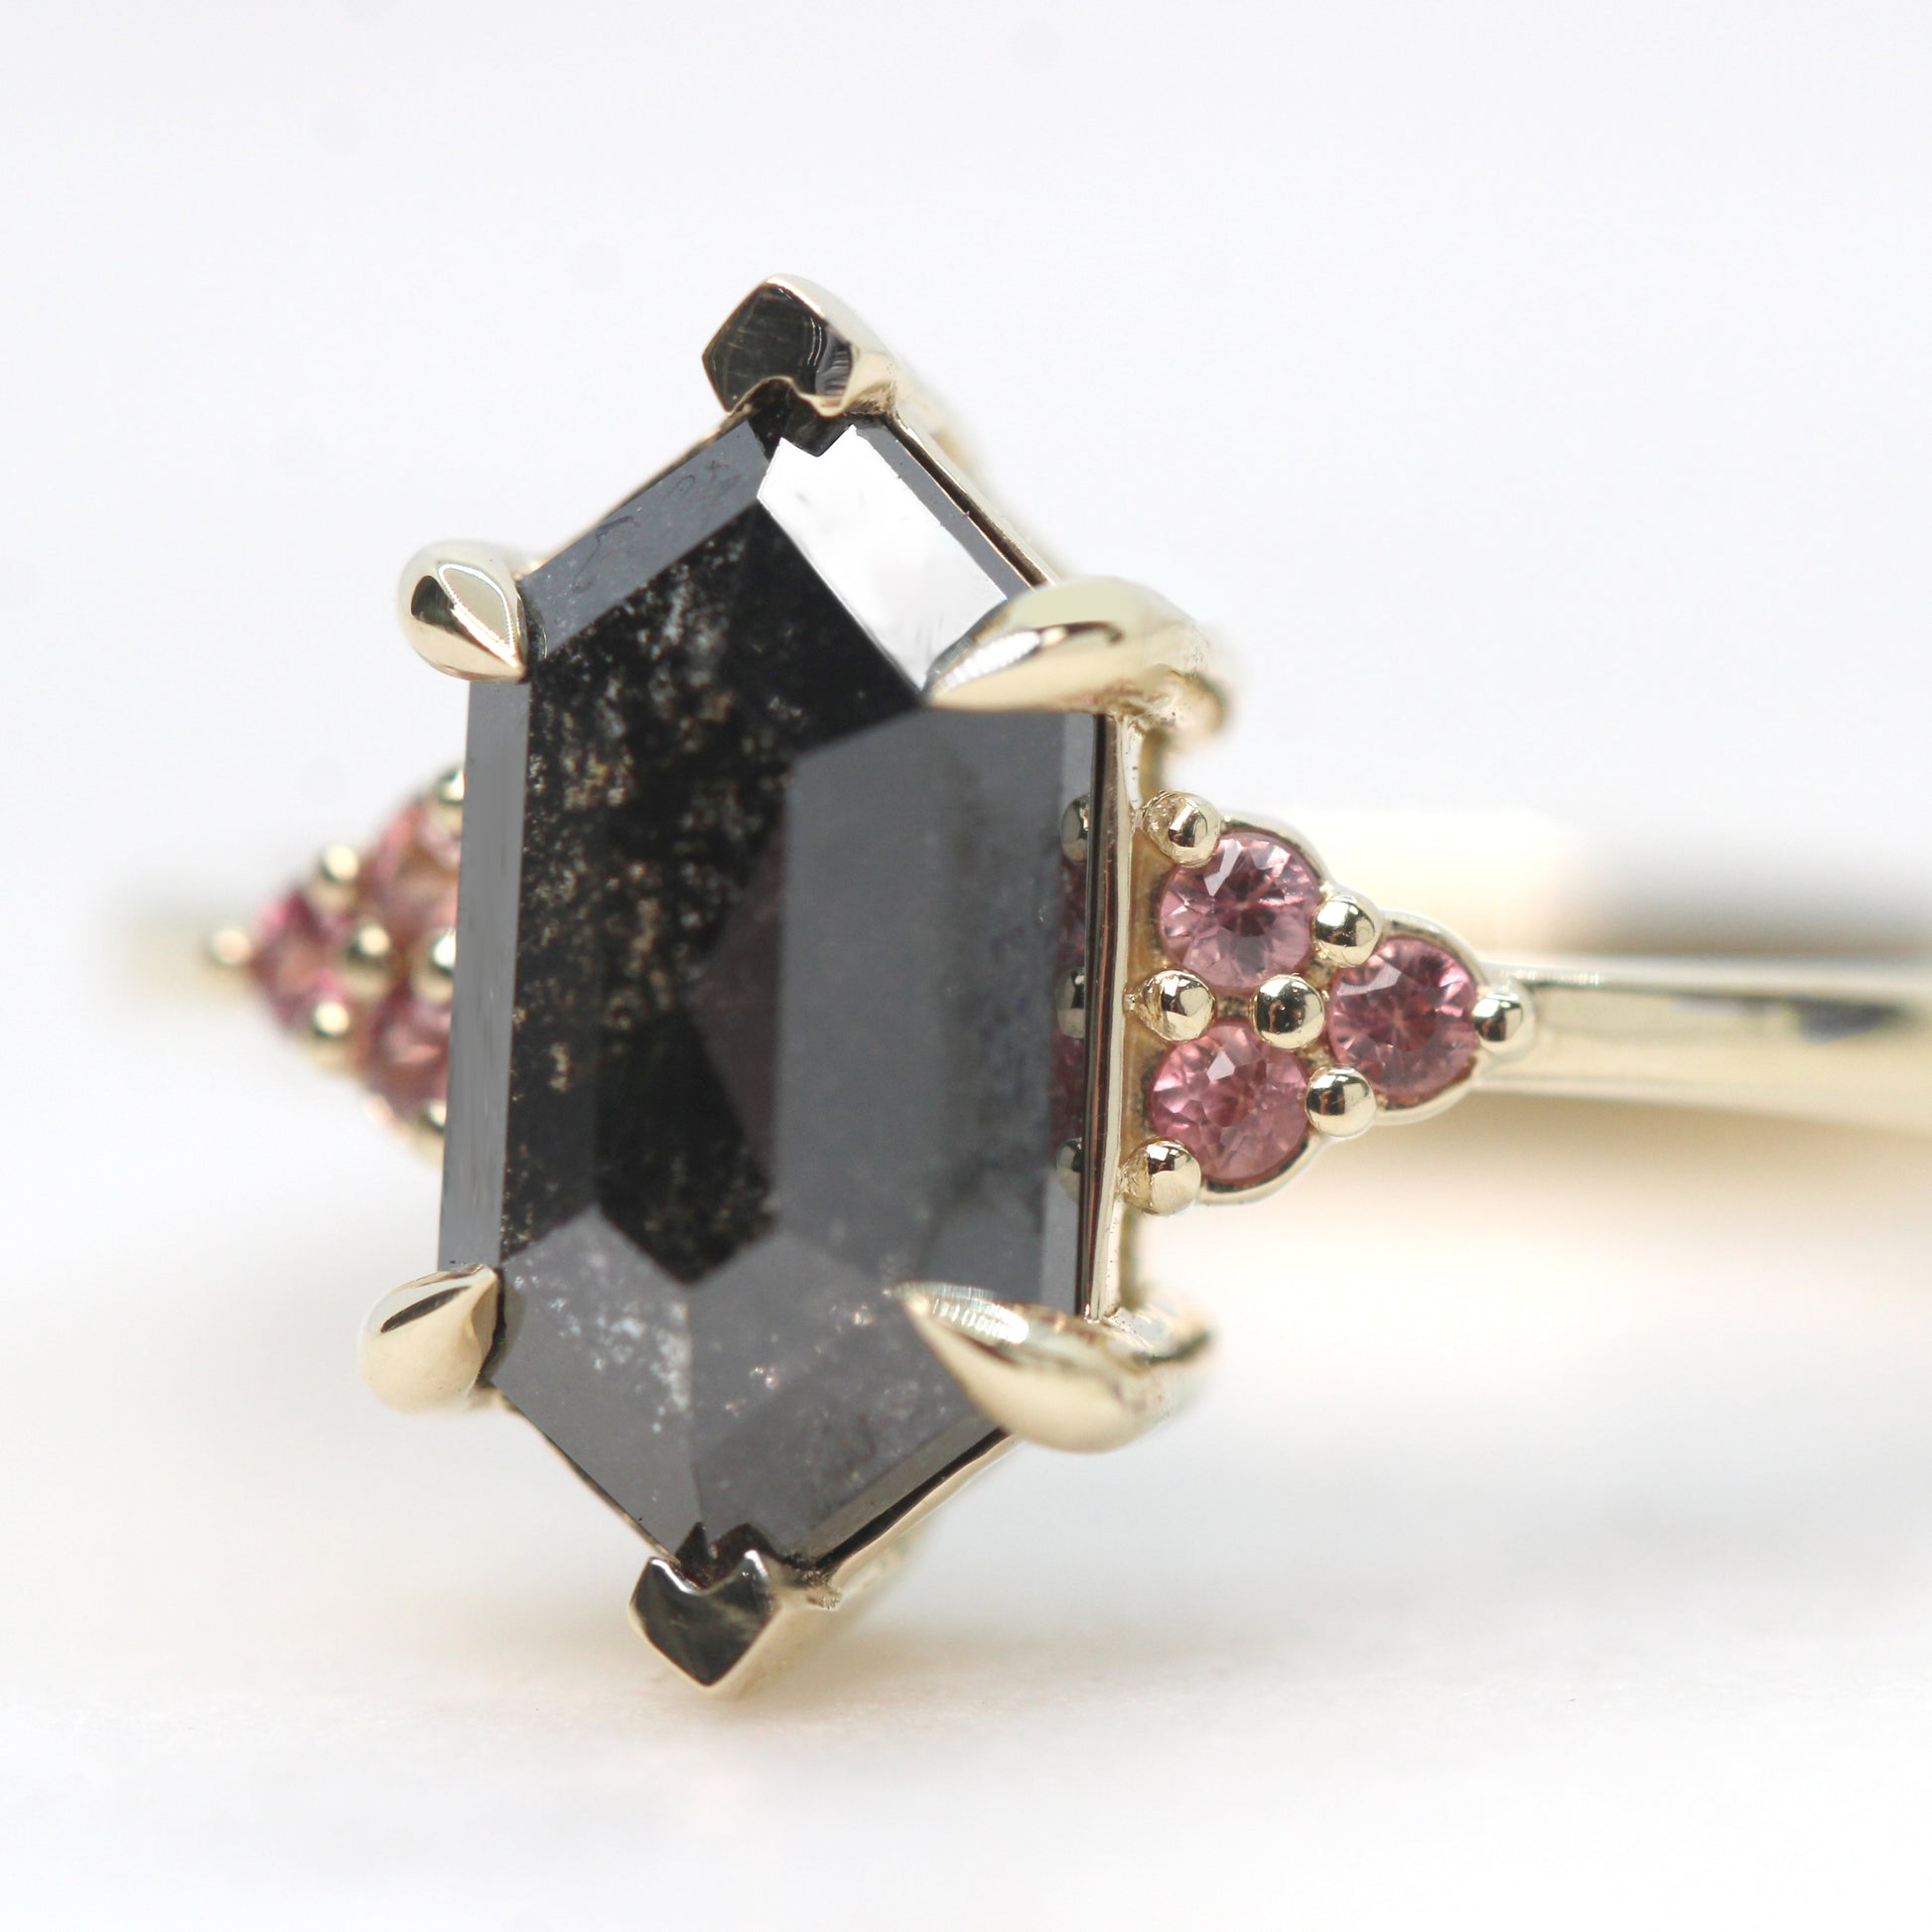 Imogene Ring with a 2.21 Carat Black Hexagon Celestial Diamond and Berry Sapphire Accents in 14k Yellow Gold - Ready to Size and Ship - Midwinter Co. Alternative Bridal Rings and Modern Fine Jewelry